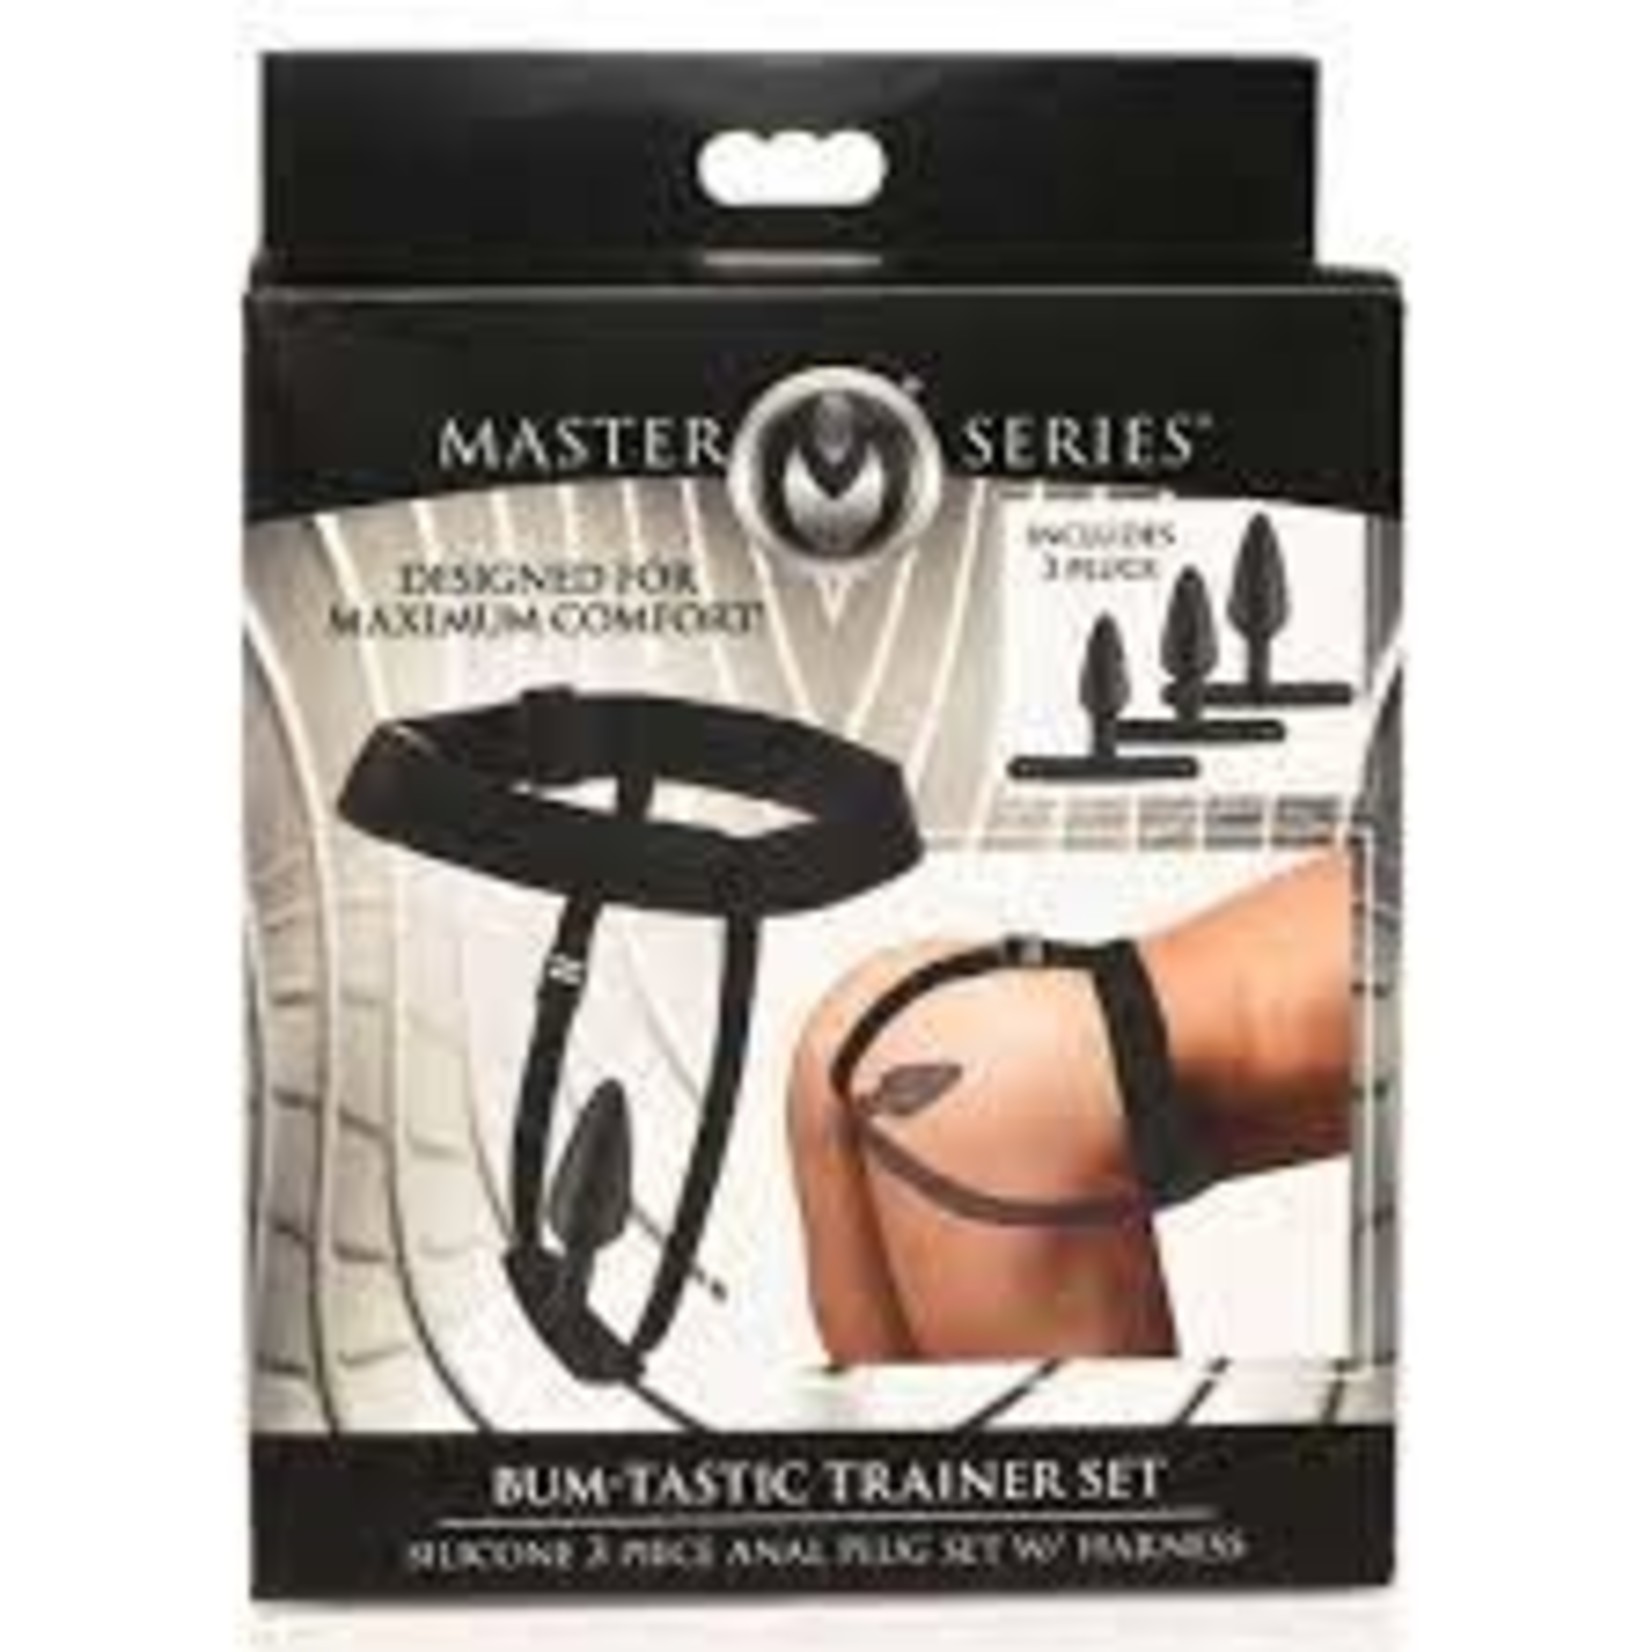 MASTER SERIES MASTER SERIES BUM-TASTIC TRAINER SET AND HARNESS